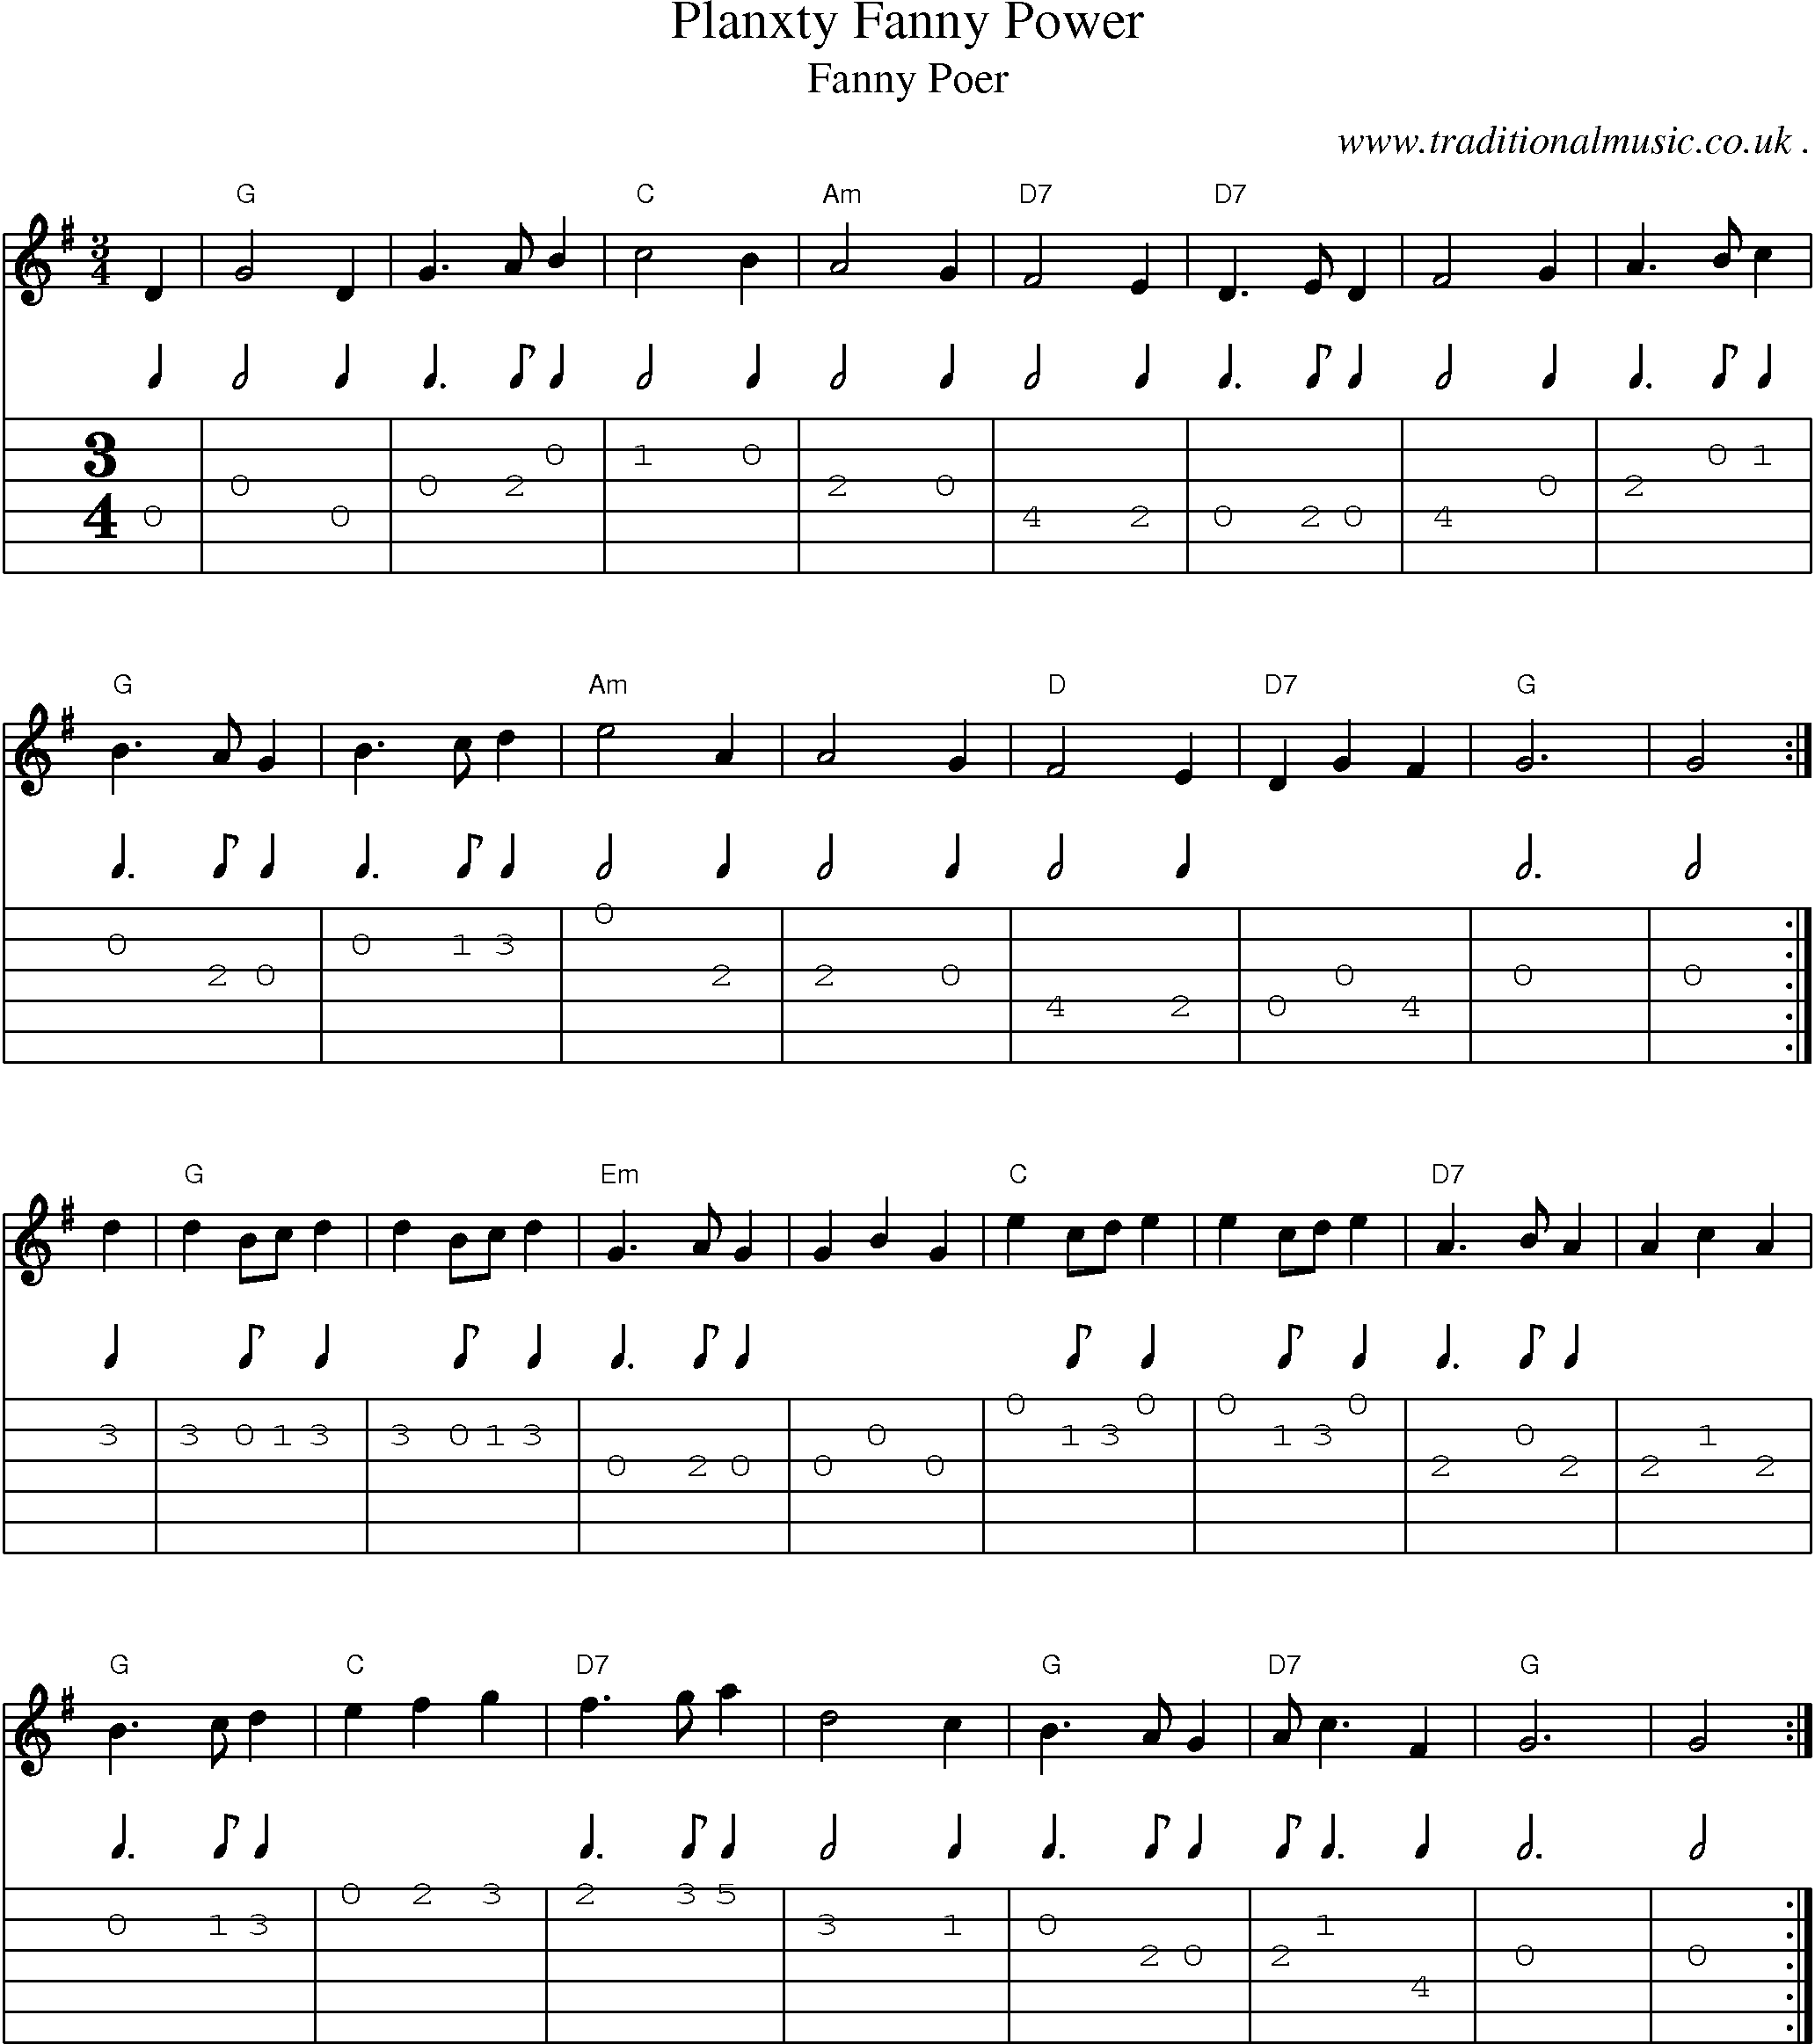 Music Score and Guitar Tabs for Planxty Fanny Power